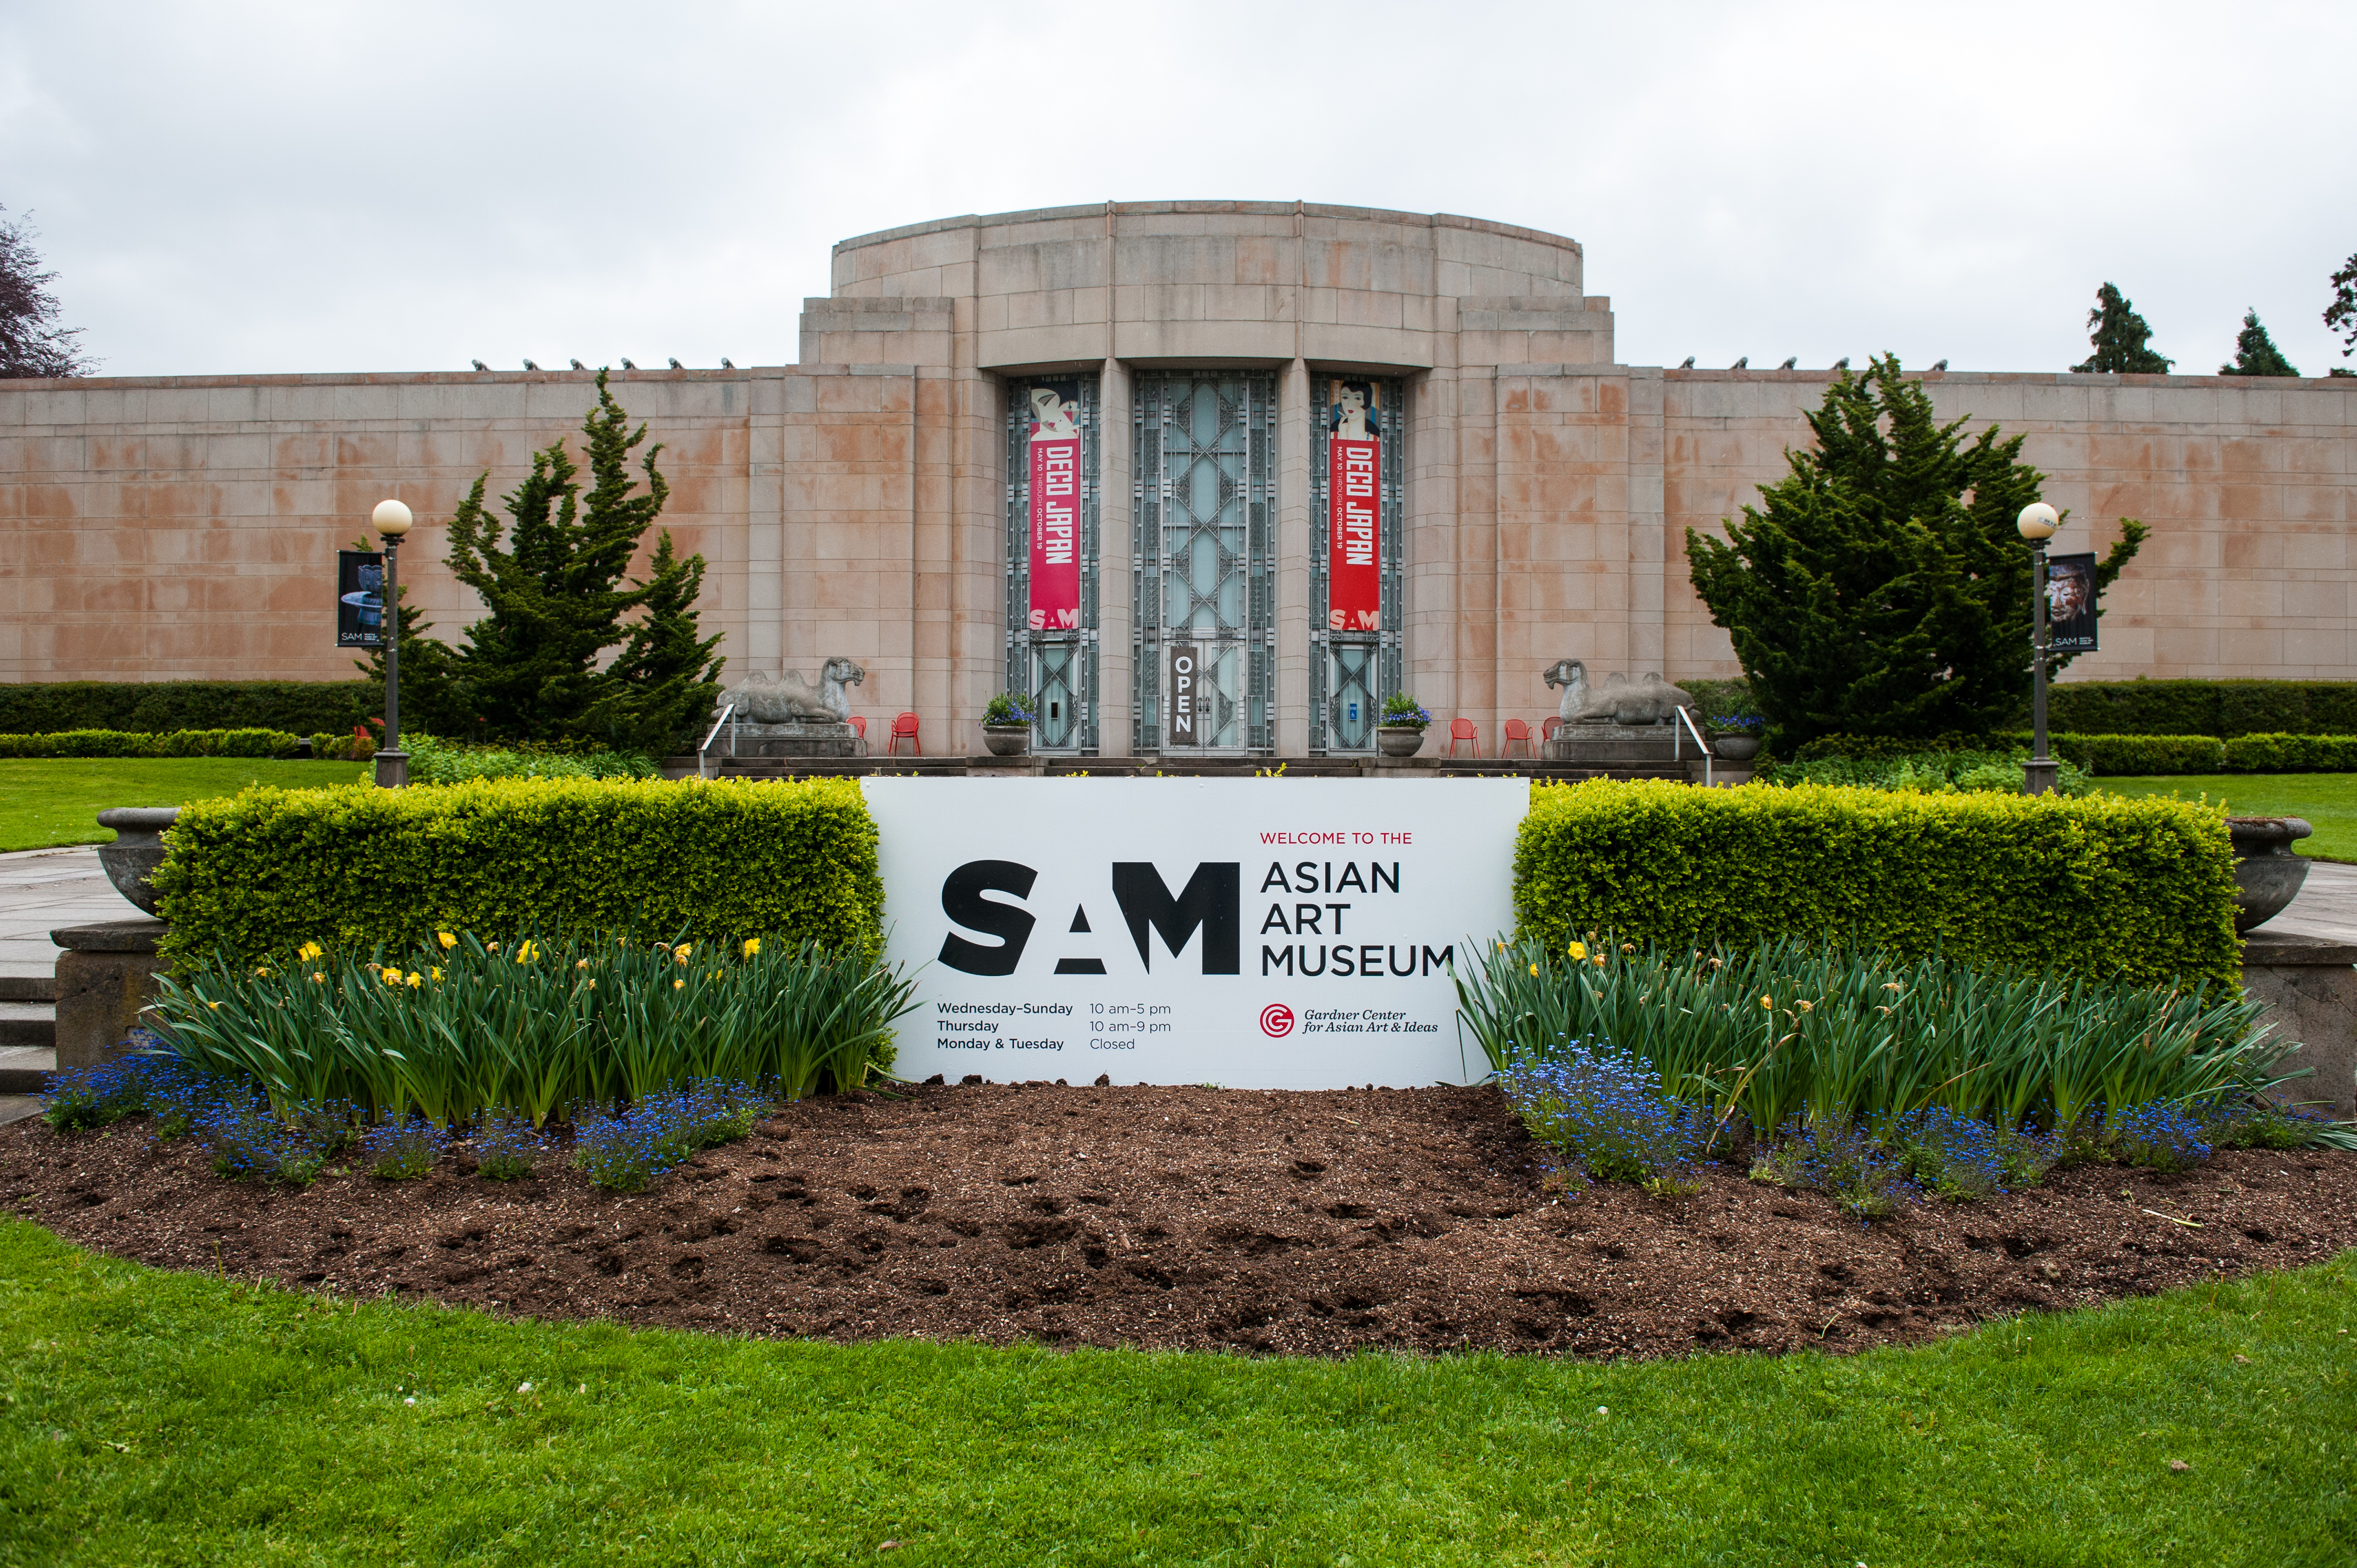 A stone, Art Deco building with a central, rounded bay with three vertical stained-glass windows. There’s landscaping in the front around a sign that says “SAM ASIAN ART MUSEUM.”